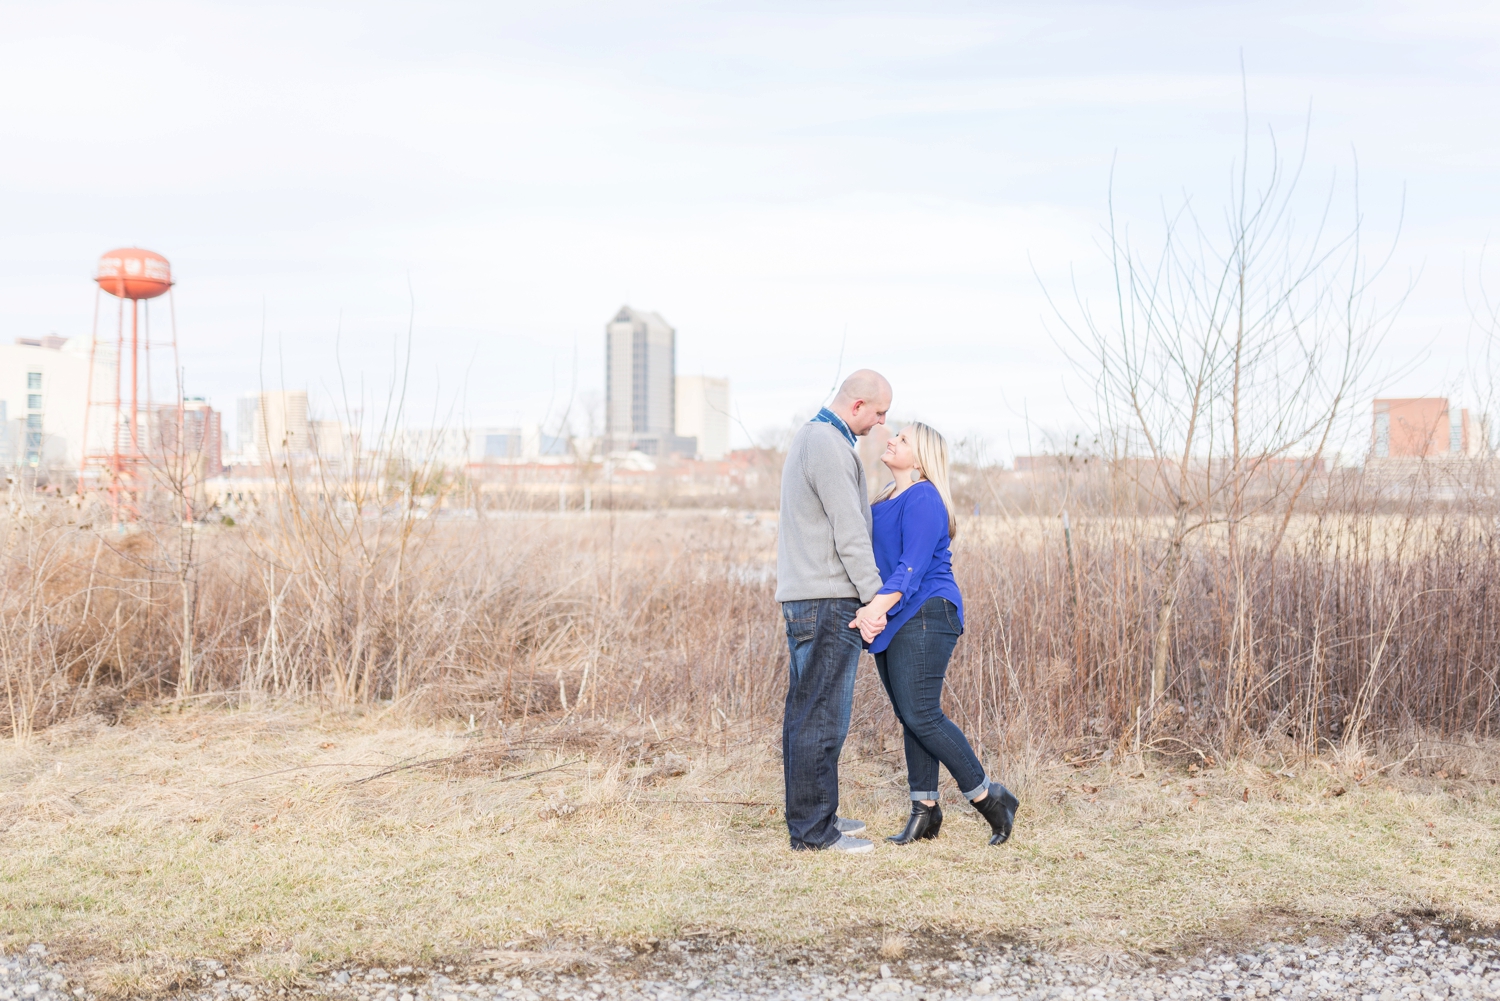 winter-engaged-couple-at-their-photo-session-at-the-scioto-audubon-park-near-grange-audubon-center-with-walkways-and-grass_0343